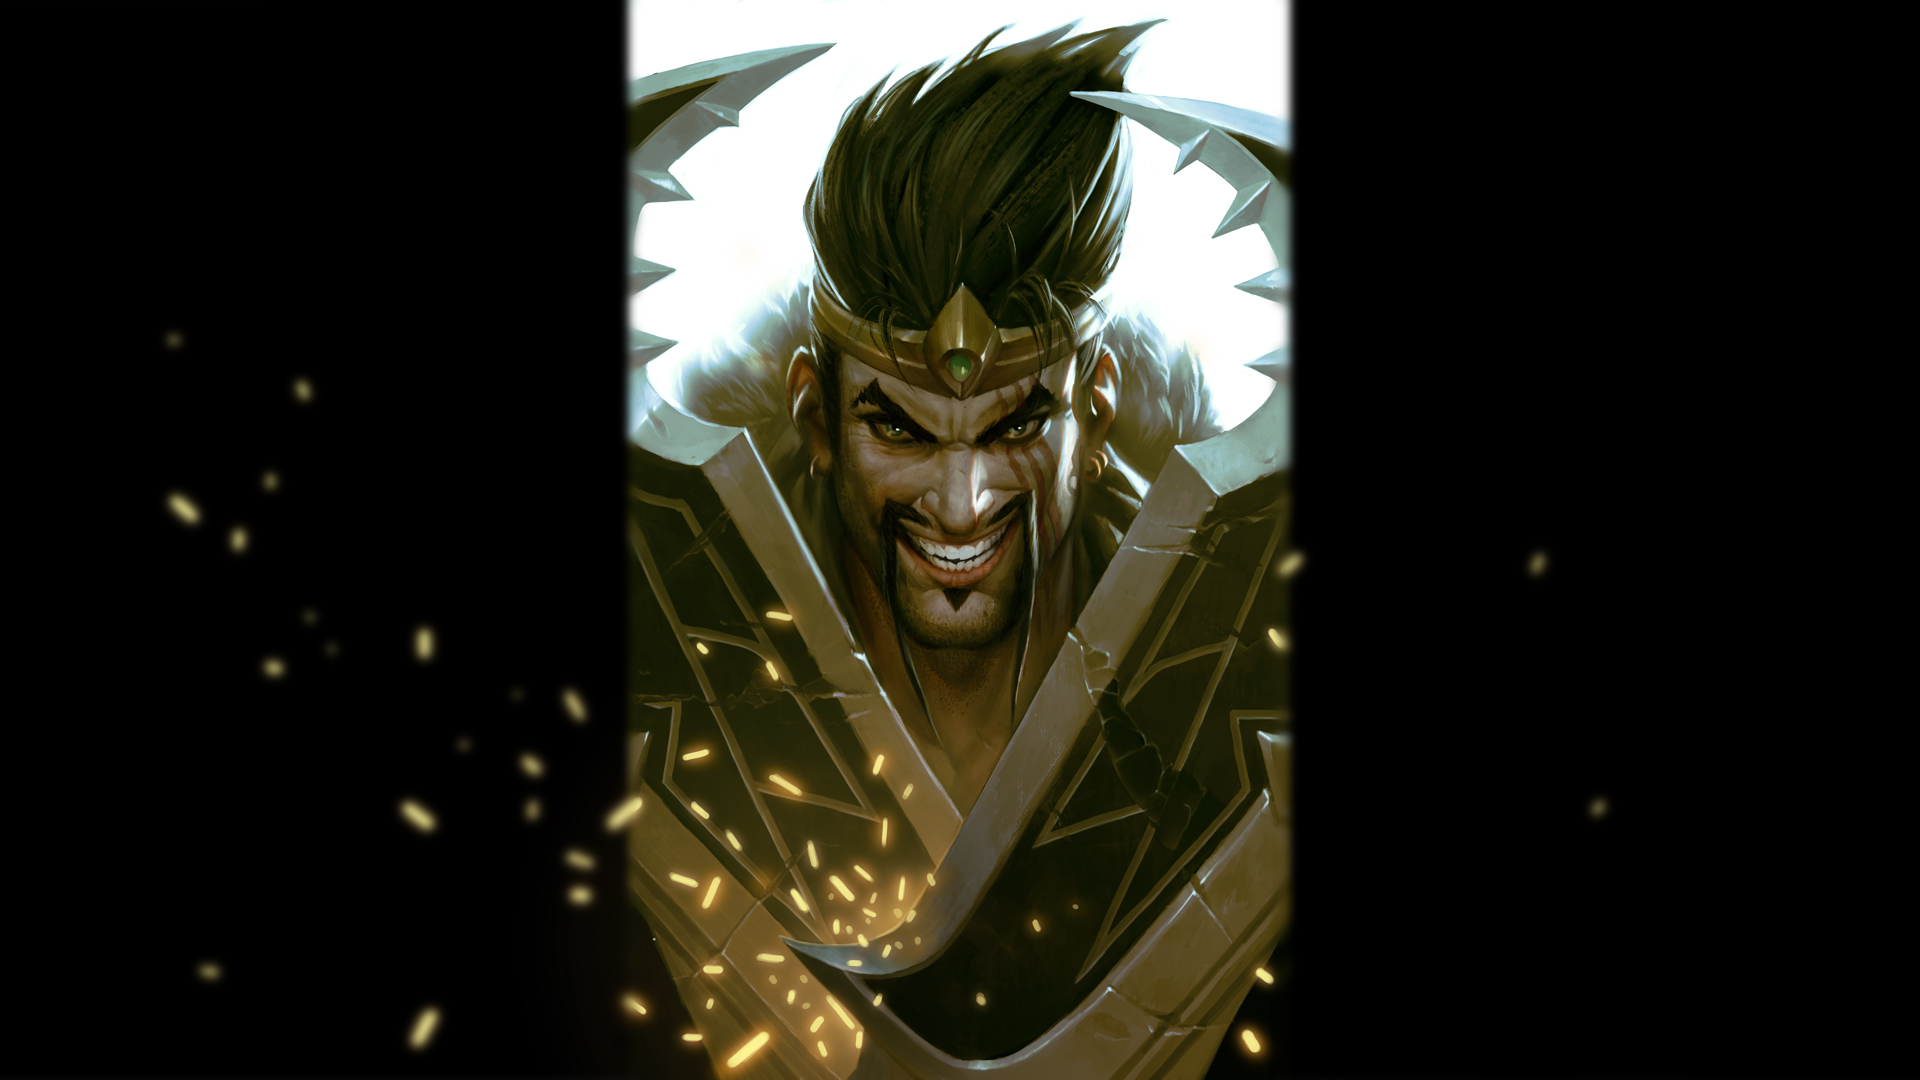 this_is_where_draven_shines__by_hellstern-d8exqc2.jpg